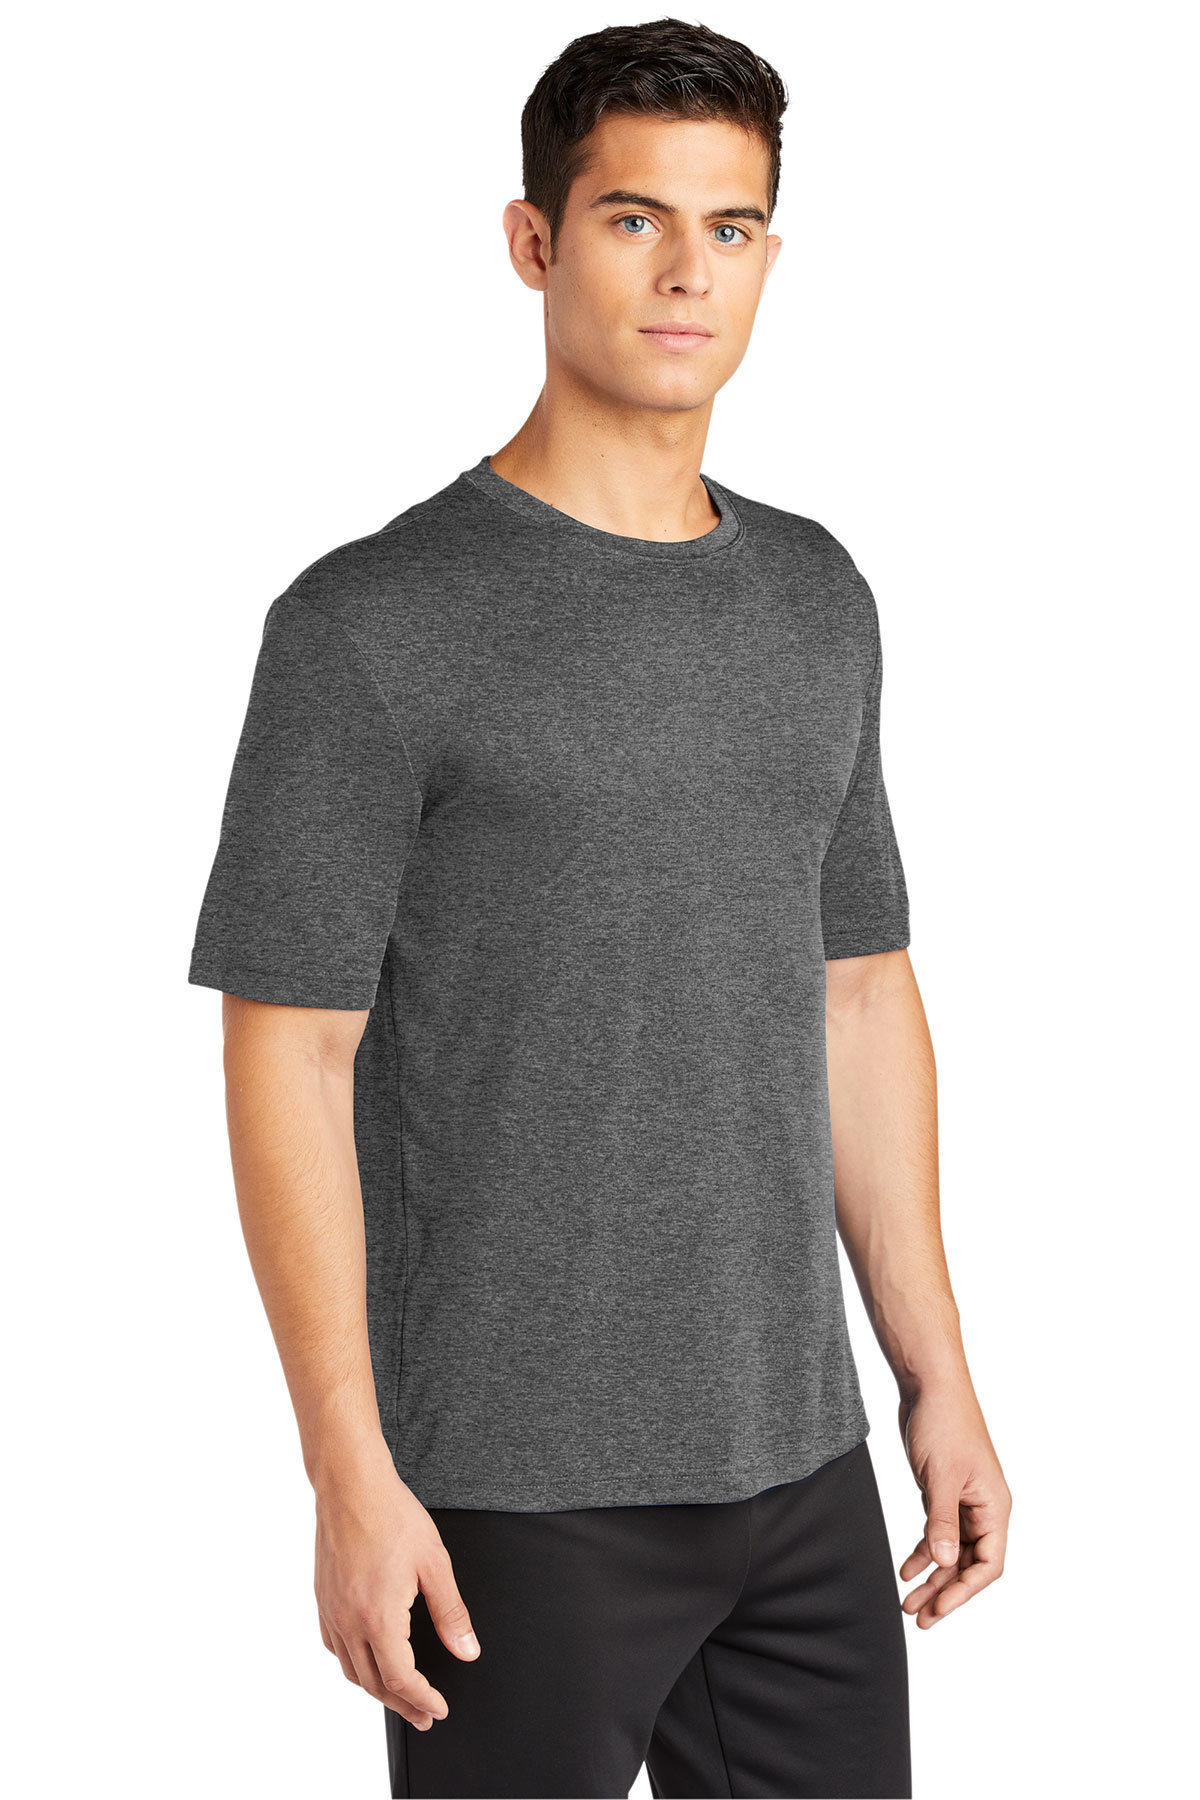 Sport-Tek PosiCharge Competitor Tee – Brighter Image